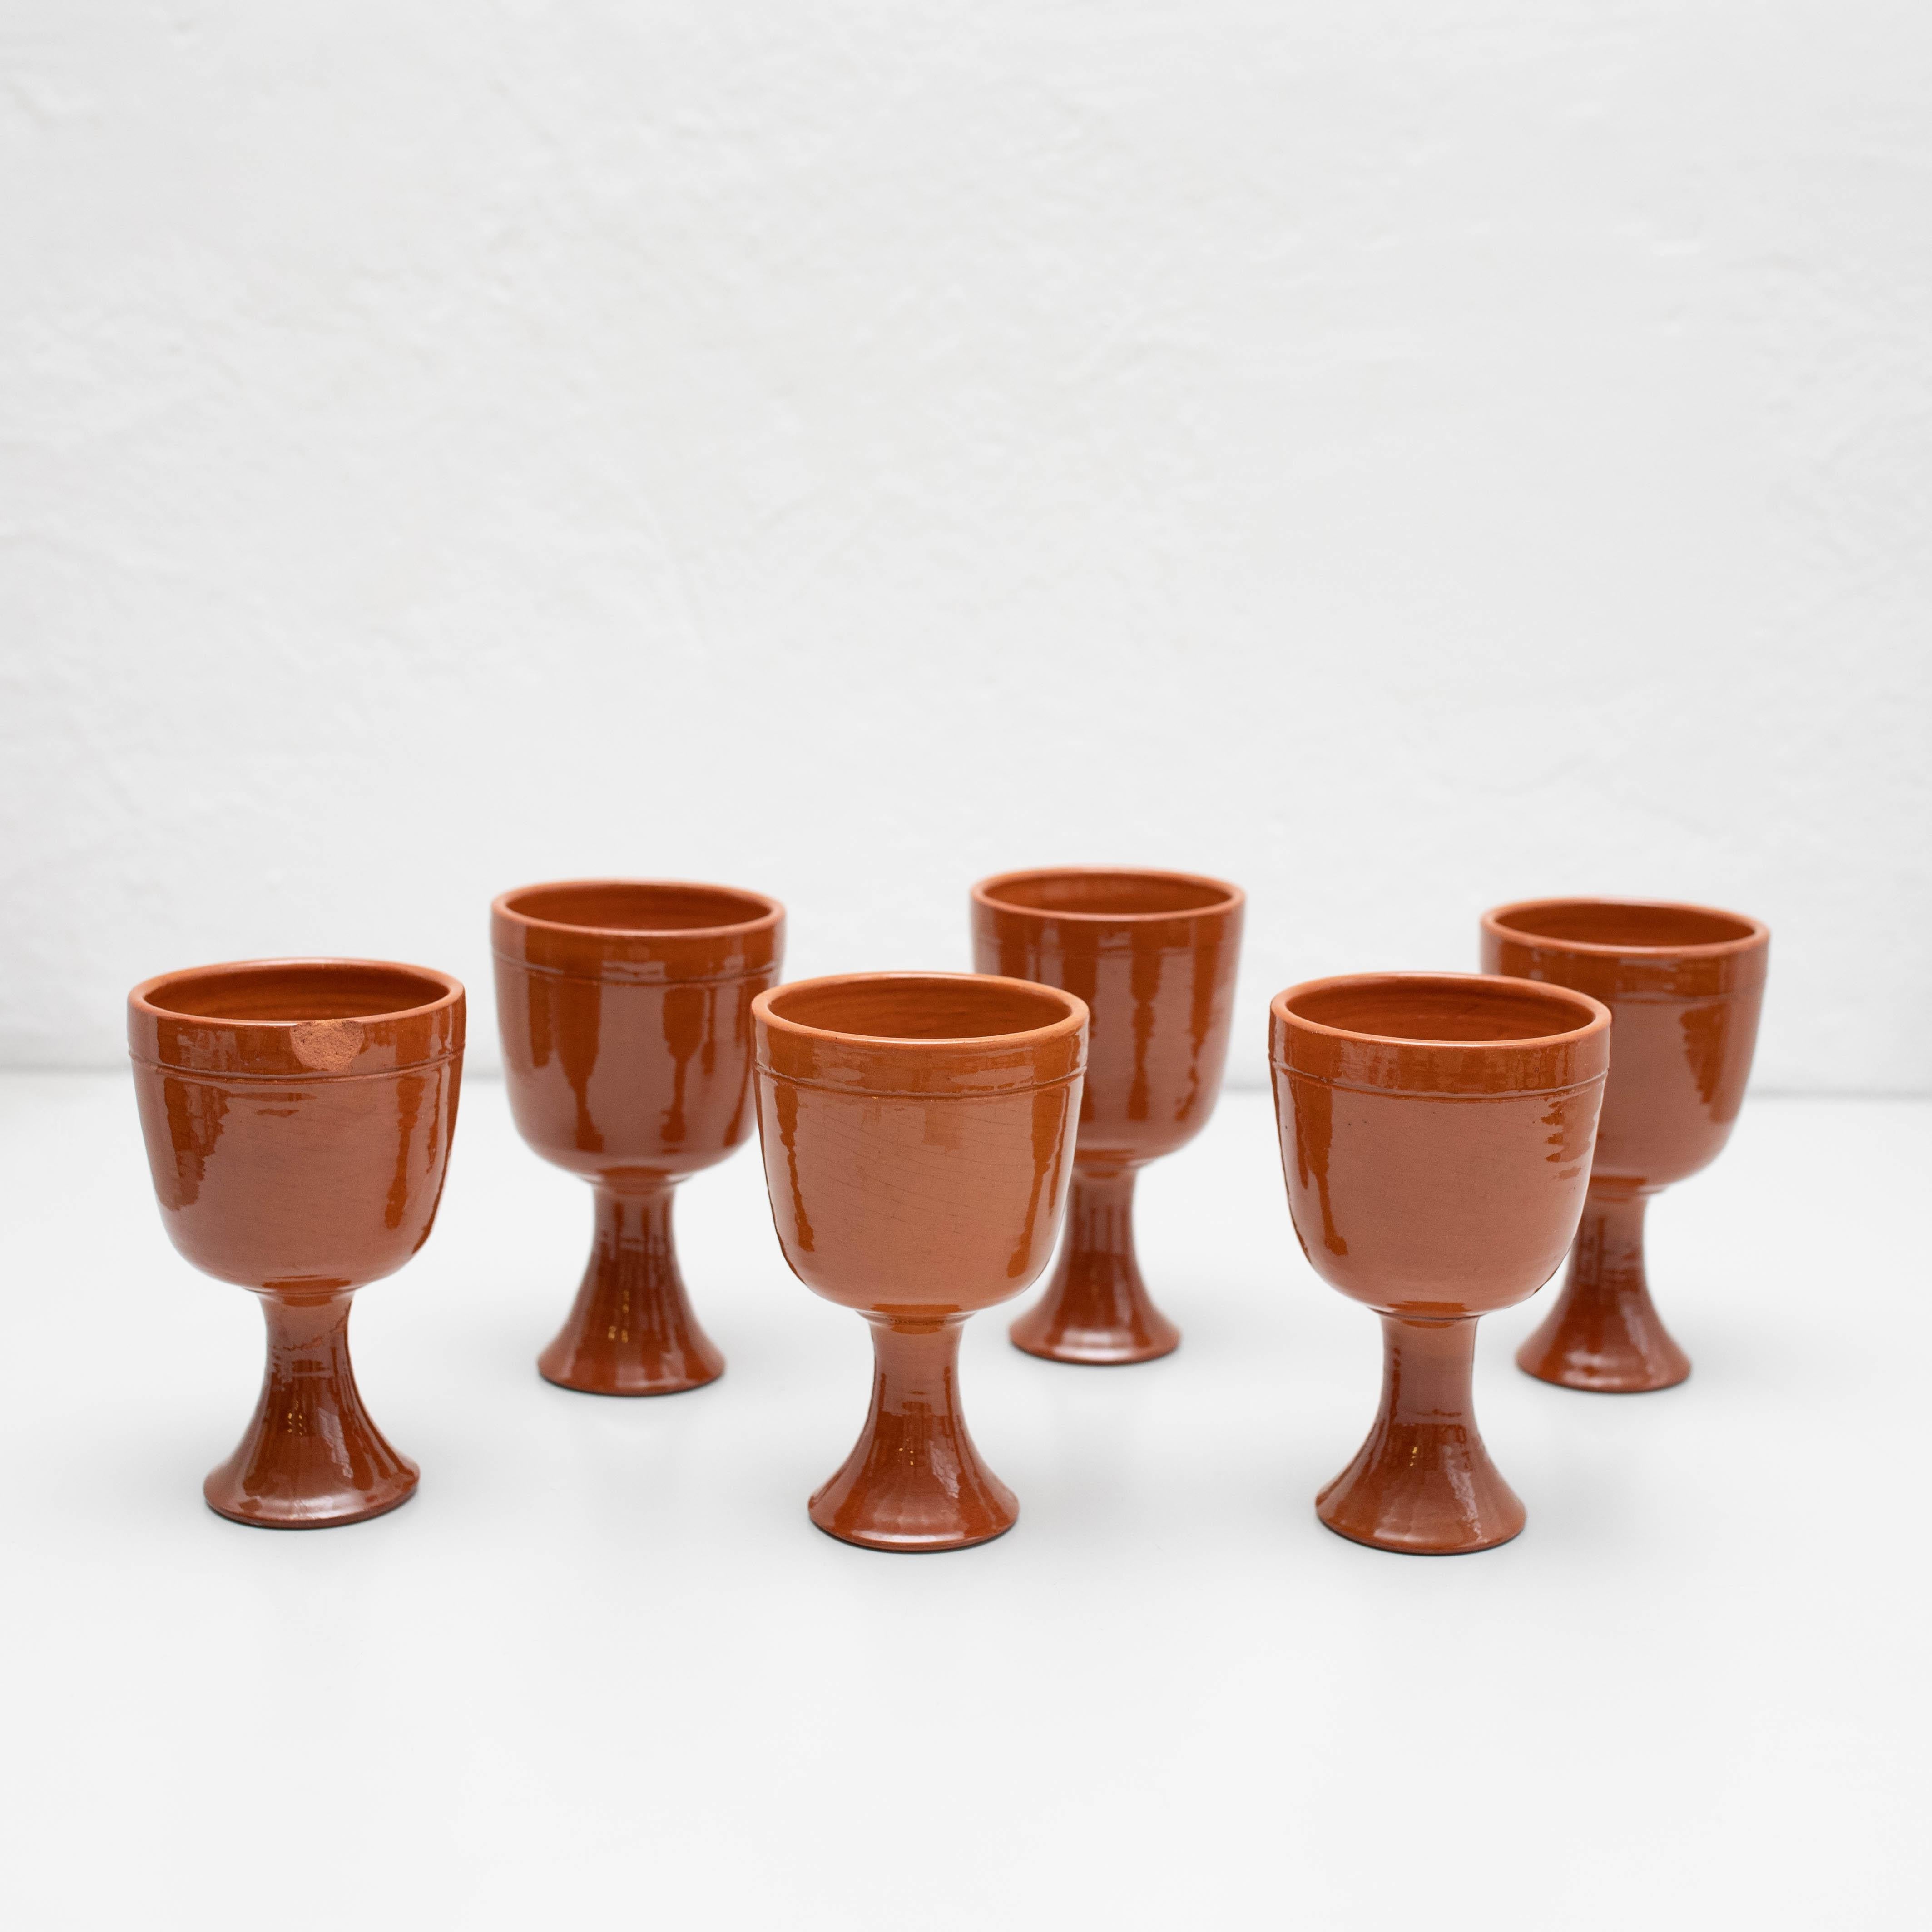 Set of 6 Antique Earthenware Wine Cups,

Made by unknown manufacturer in Spain, circa 1950.

In original condition, with minor wear consistent with age and use, preserving a beautiful patina. Some has